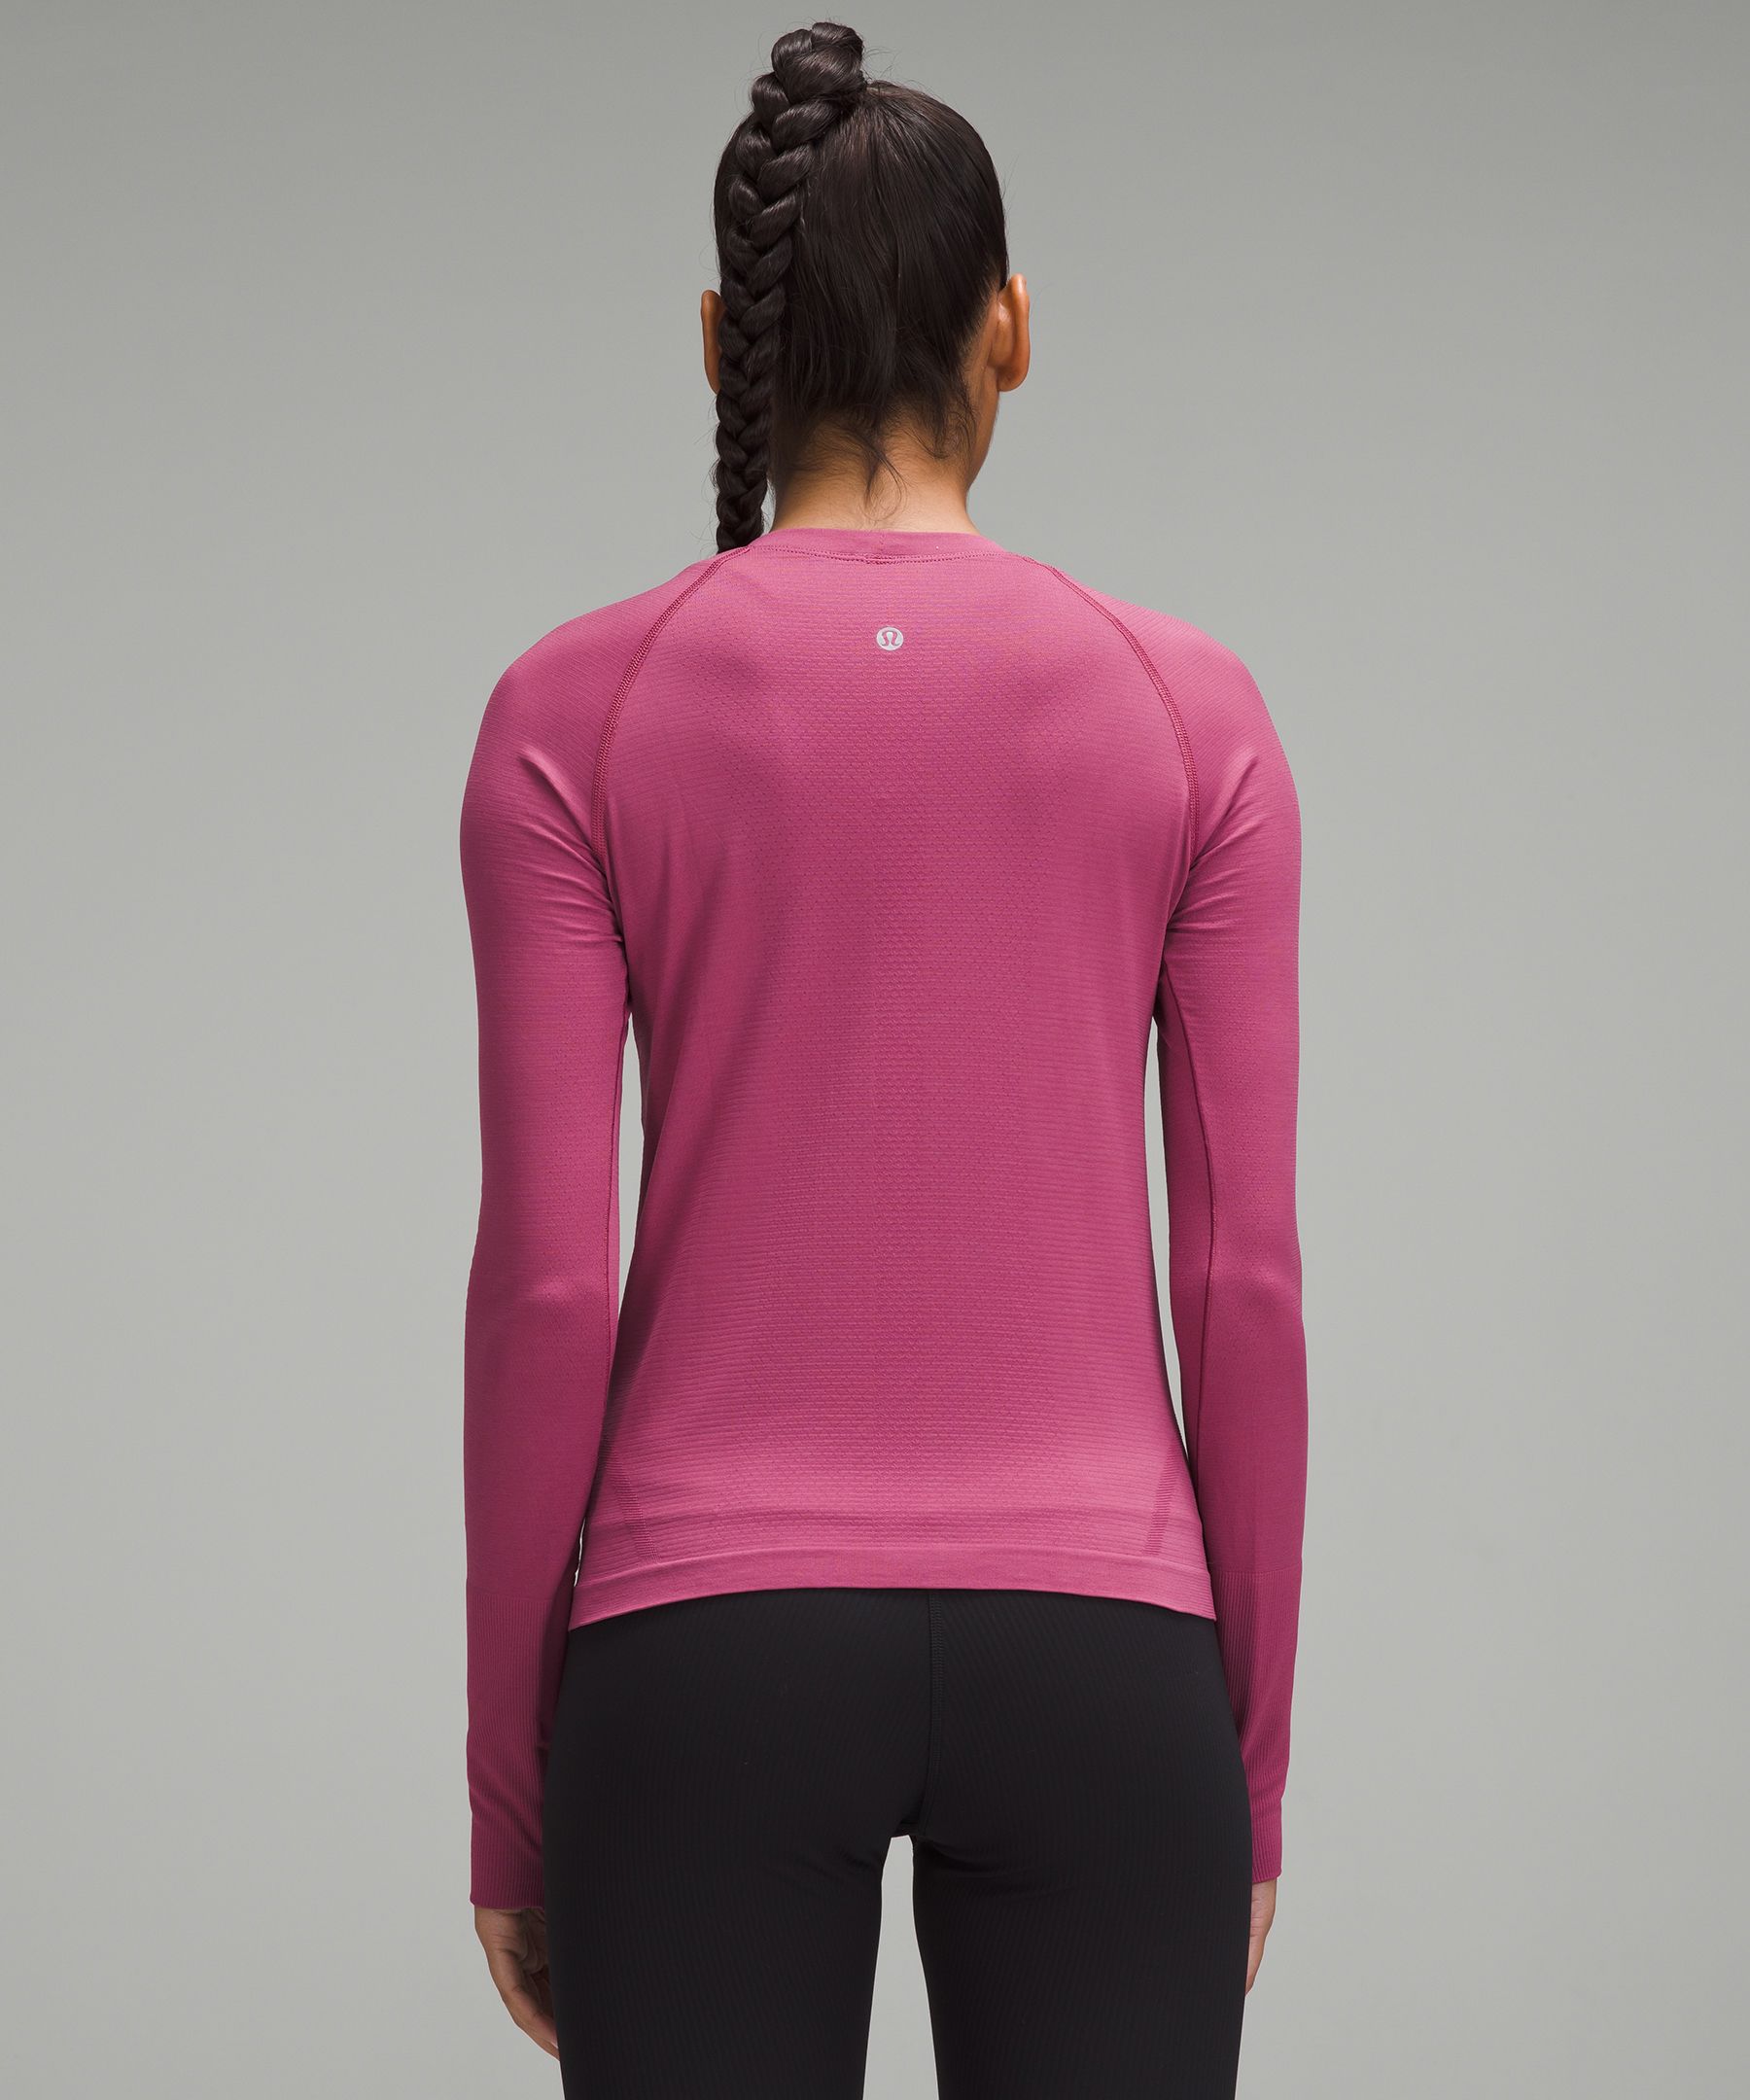 Woman in Pink Long Sleeve Shirt and Pink Leggings Riding on Green